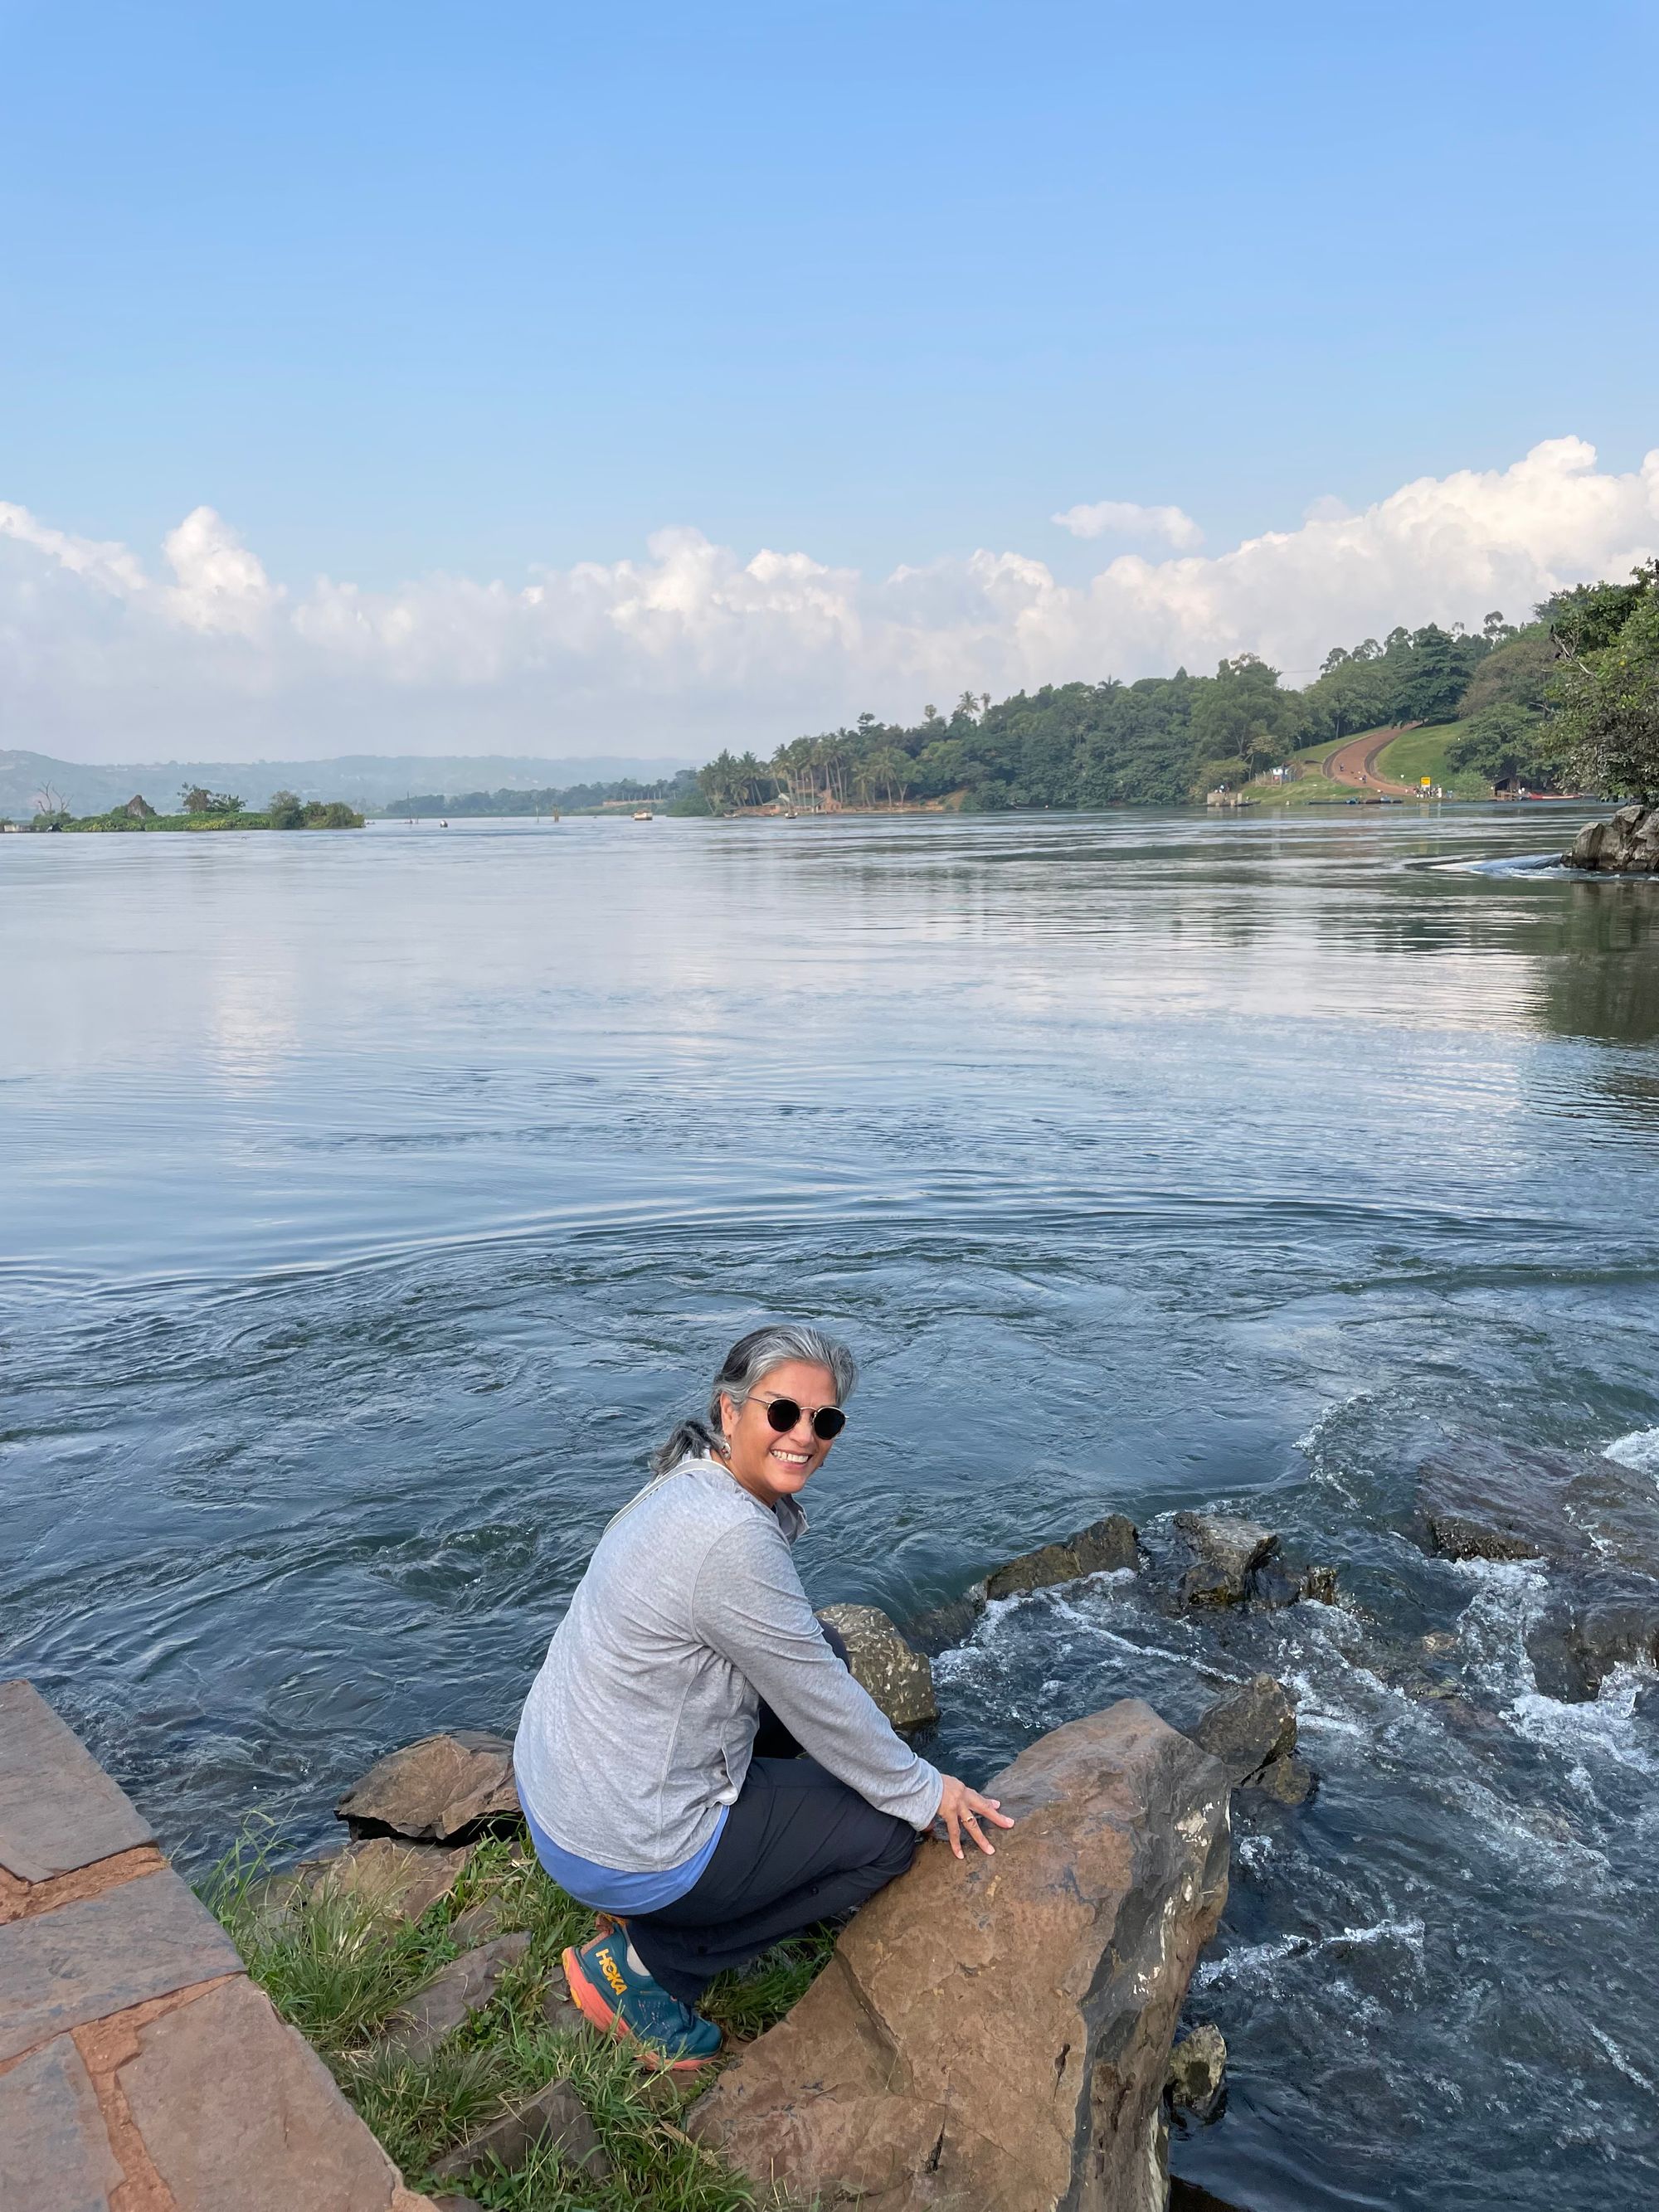 Ahluwalia crouching and smiling near the bank of a lake.